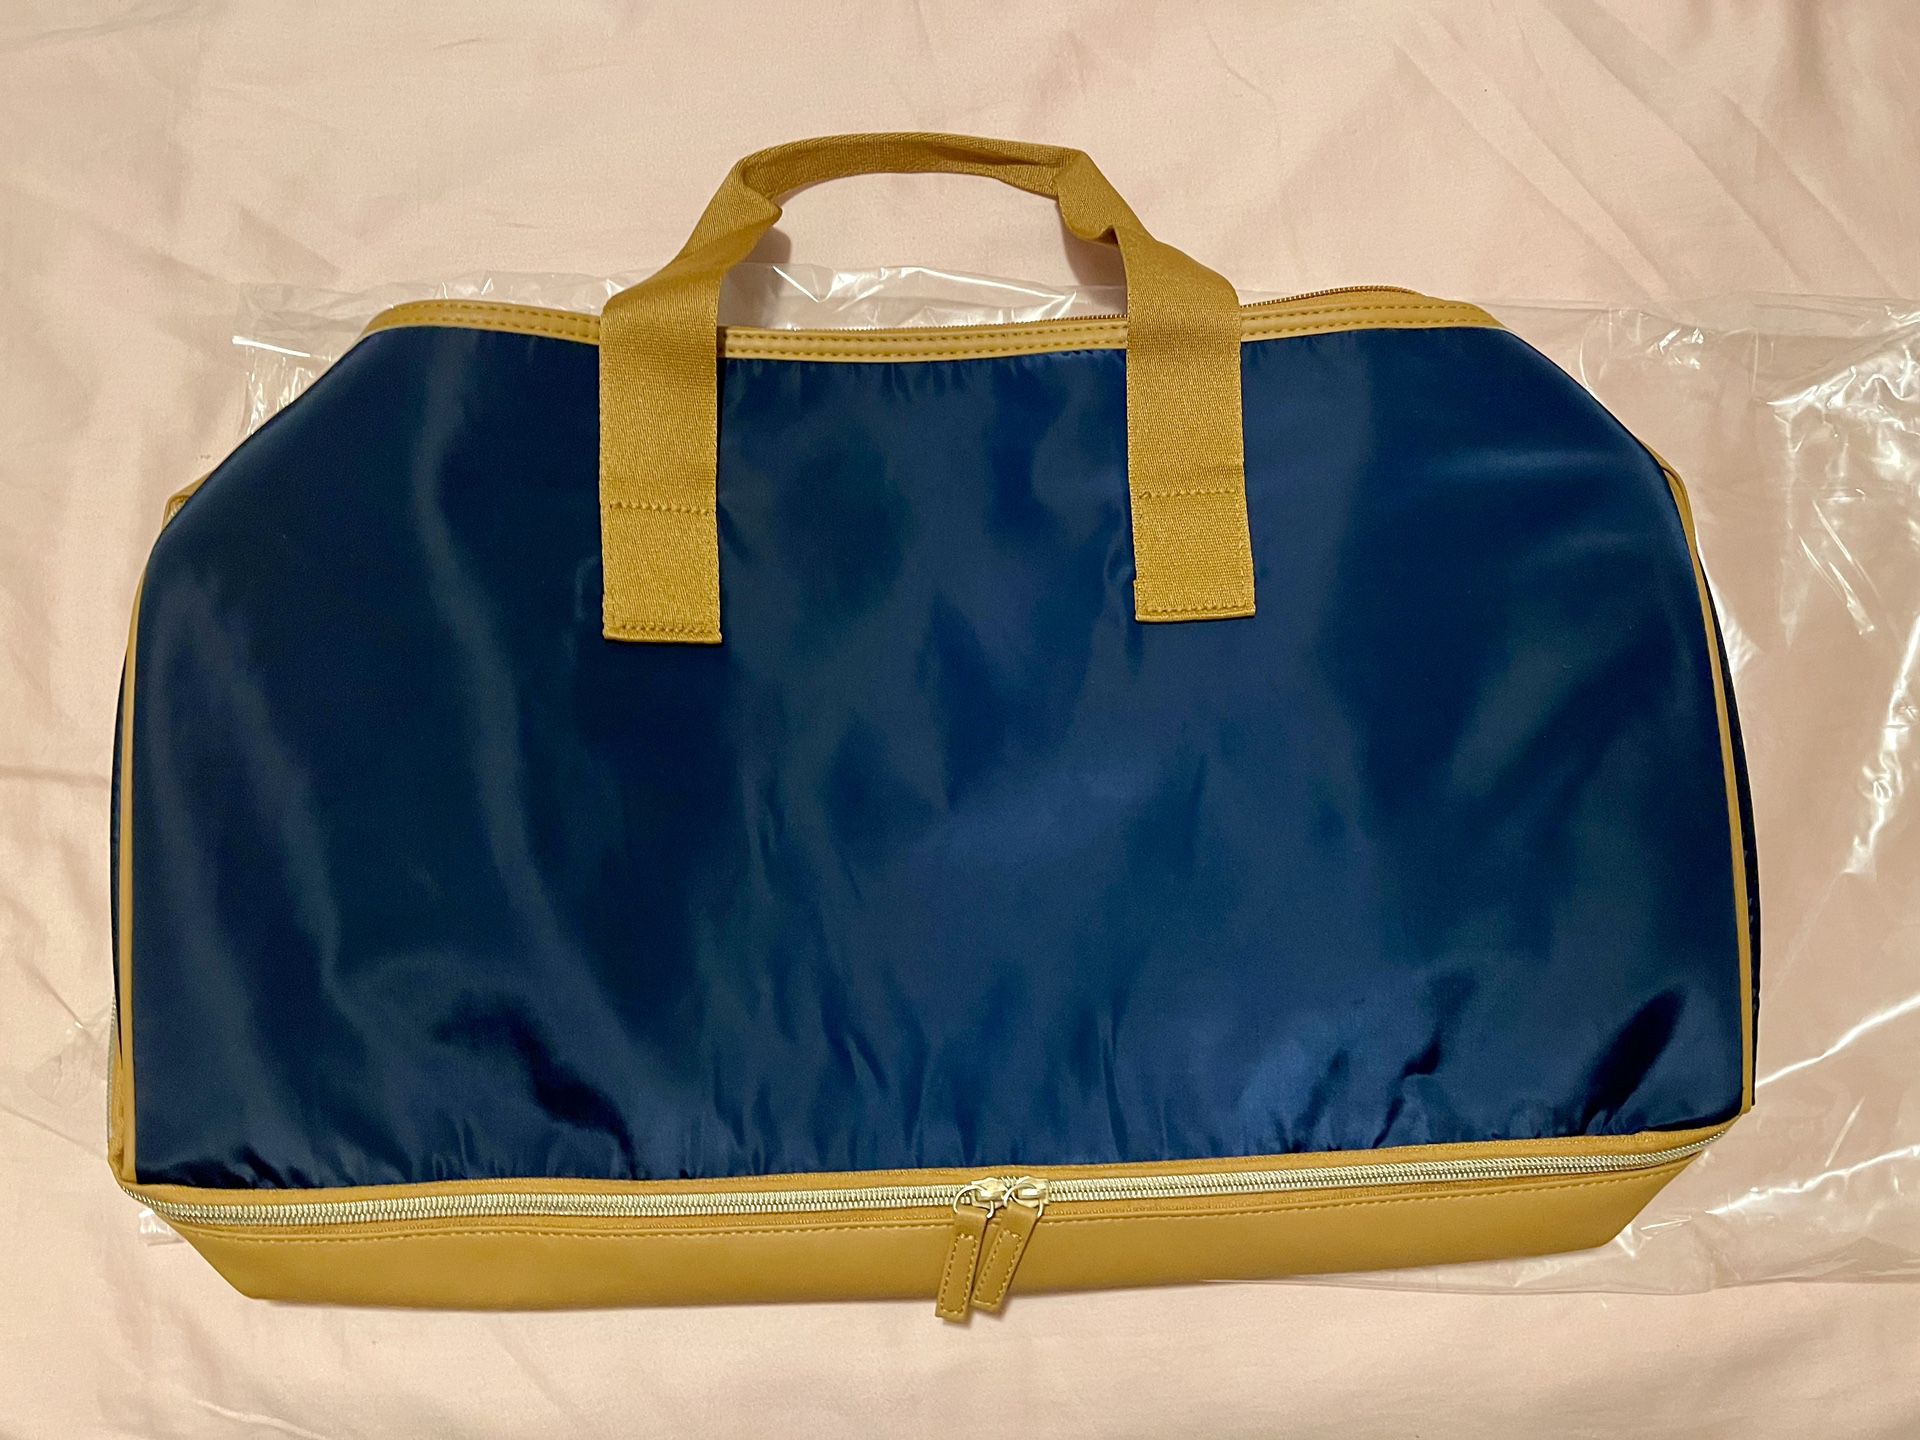 Brand New Weekender Travel Bag Duffle Bag with brown leather detail and zipped shoe compartment on the bottom (or for other use)